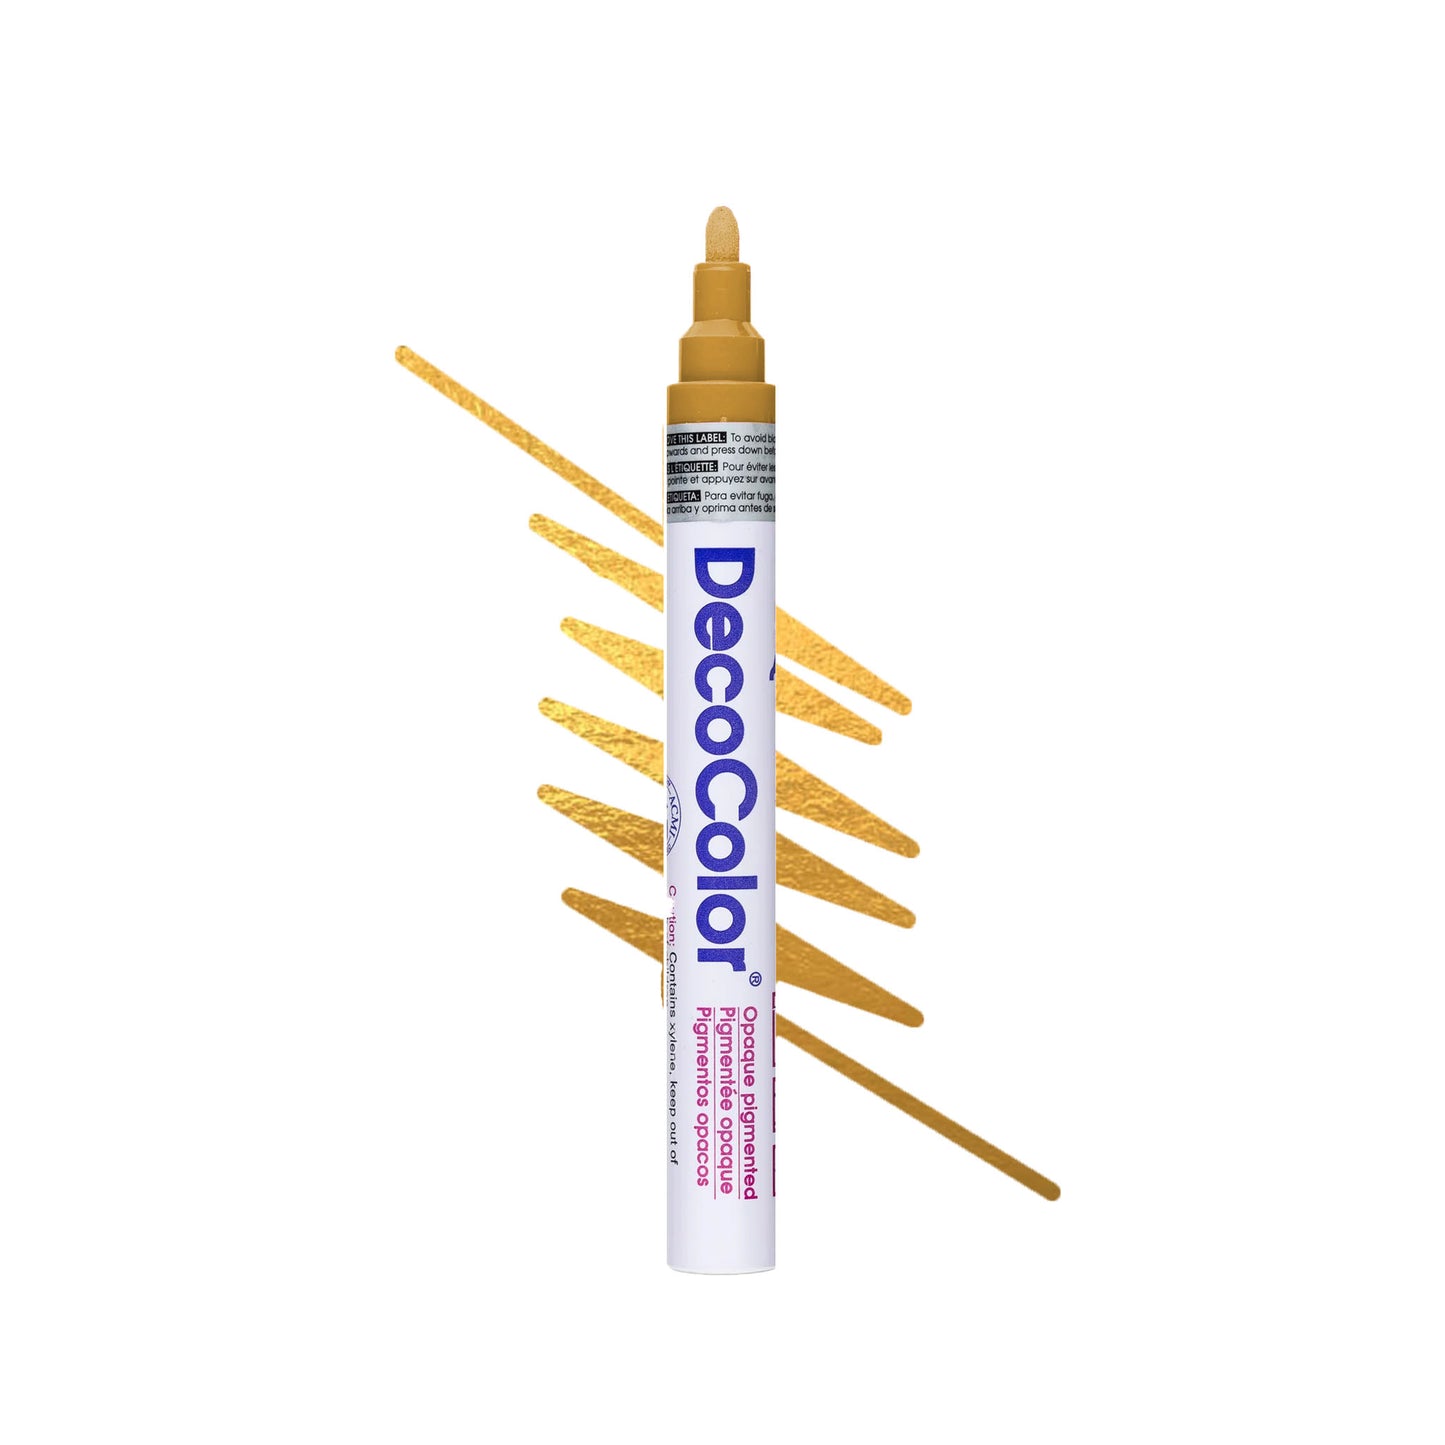 Deco Color artist paint markers in metallic gold. 